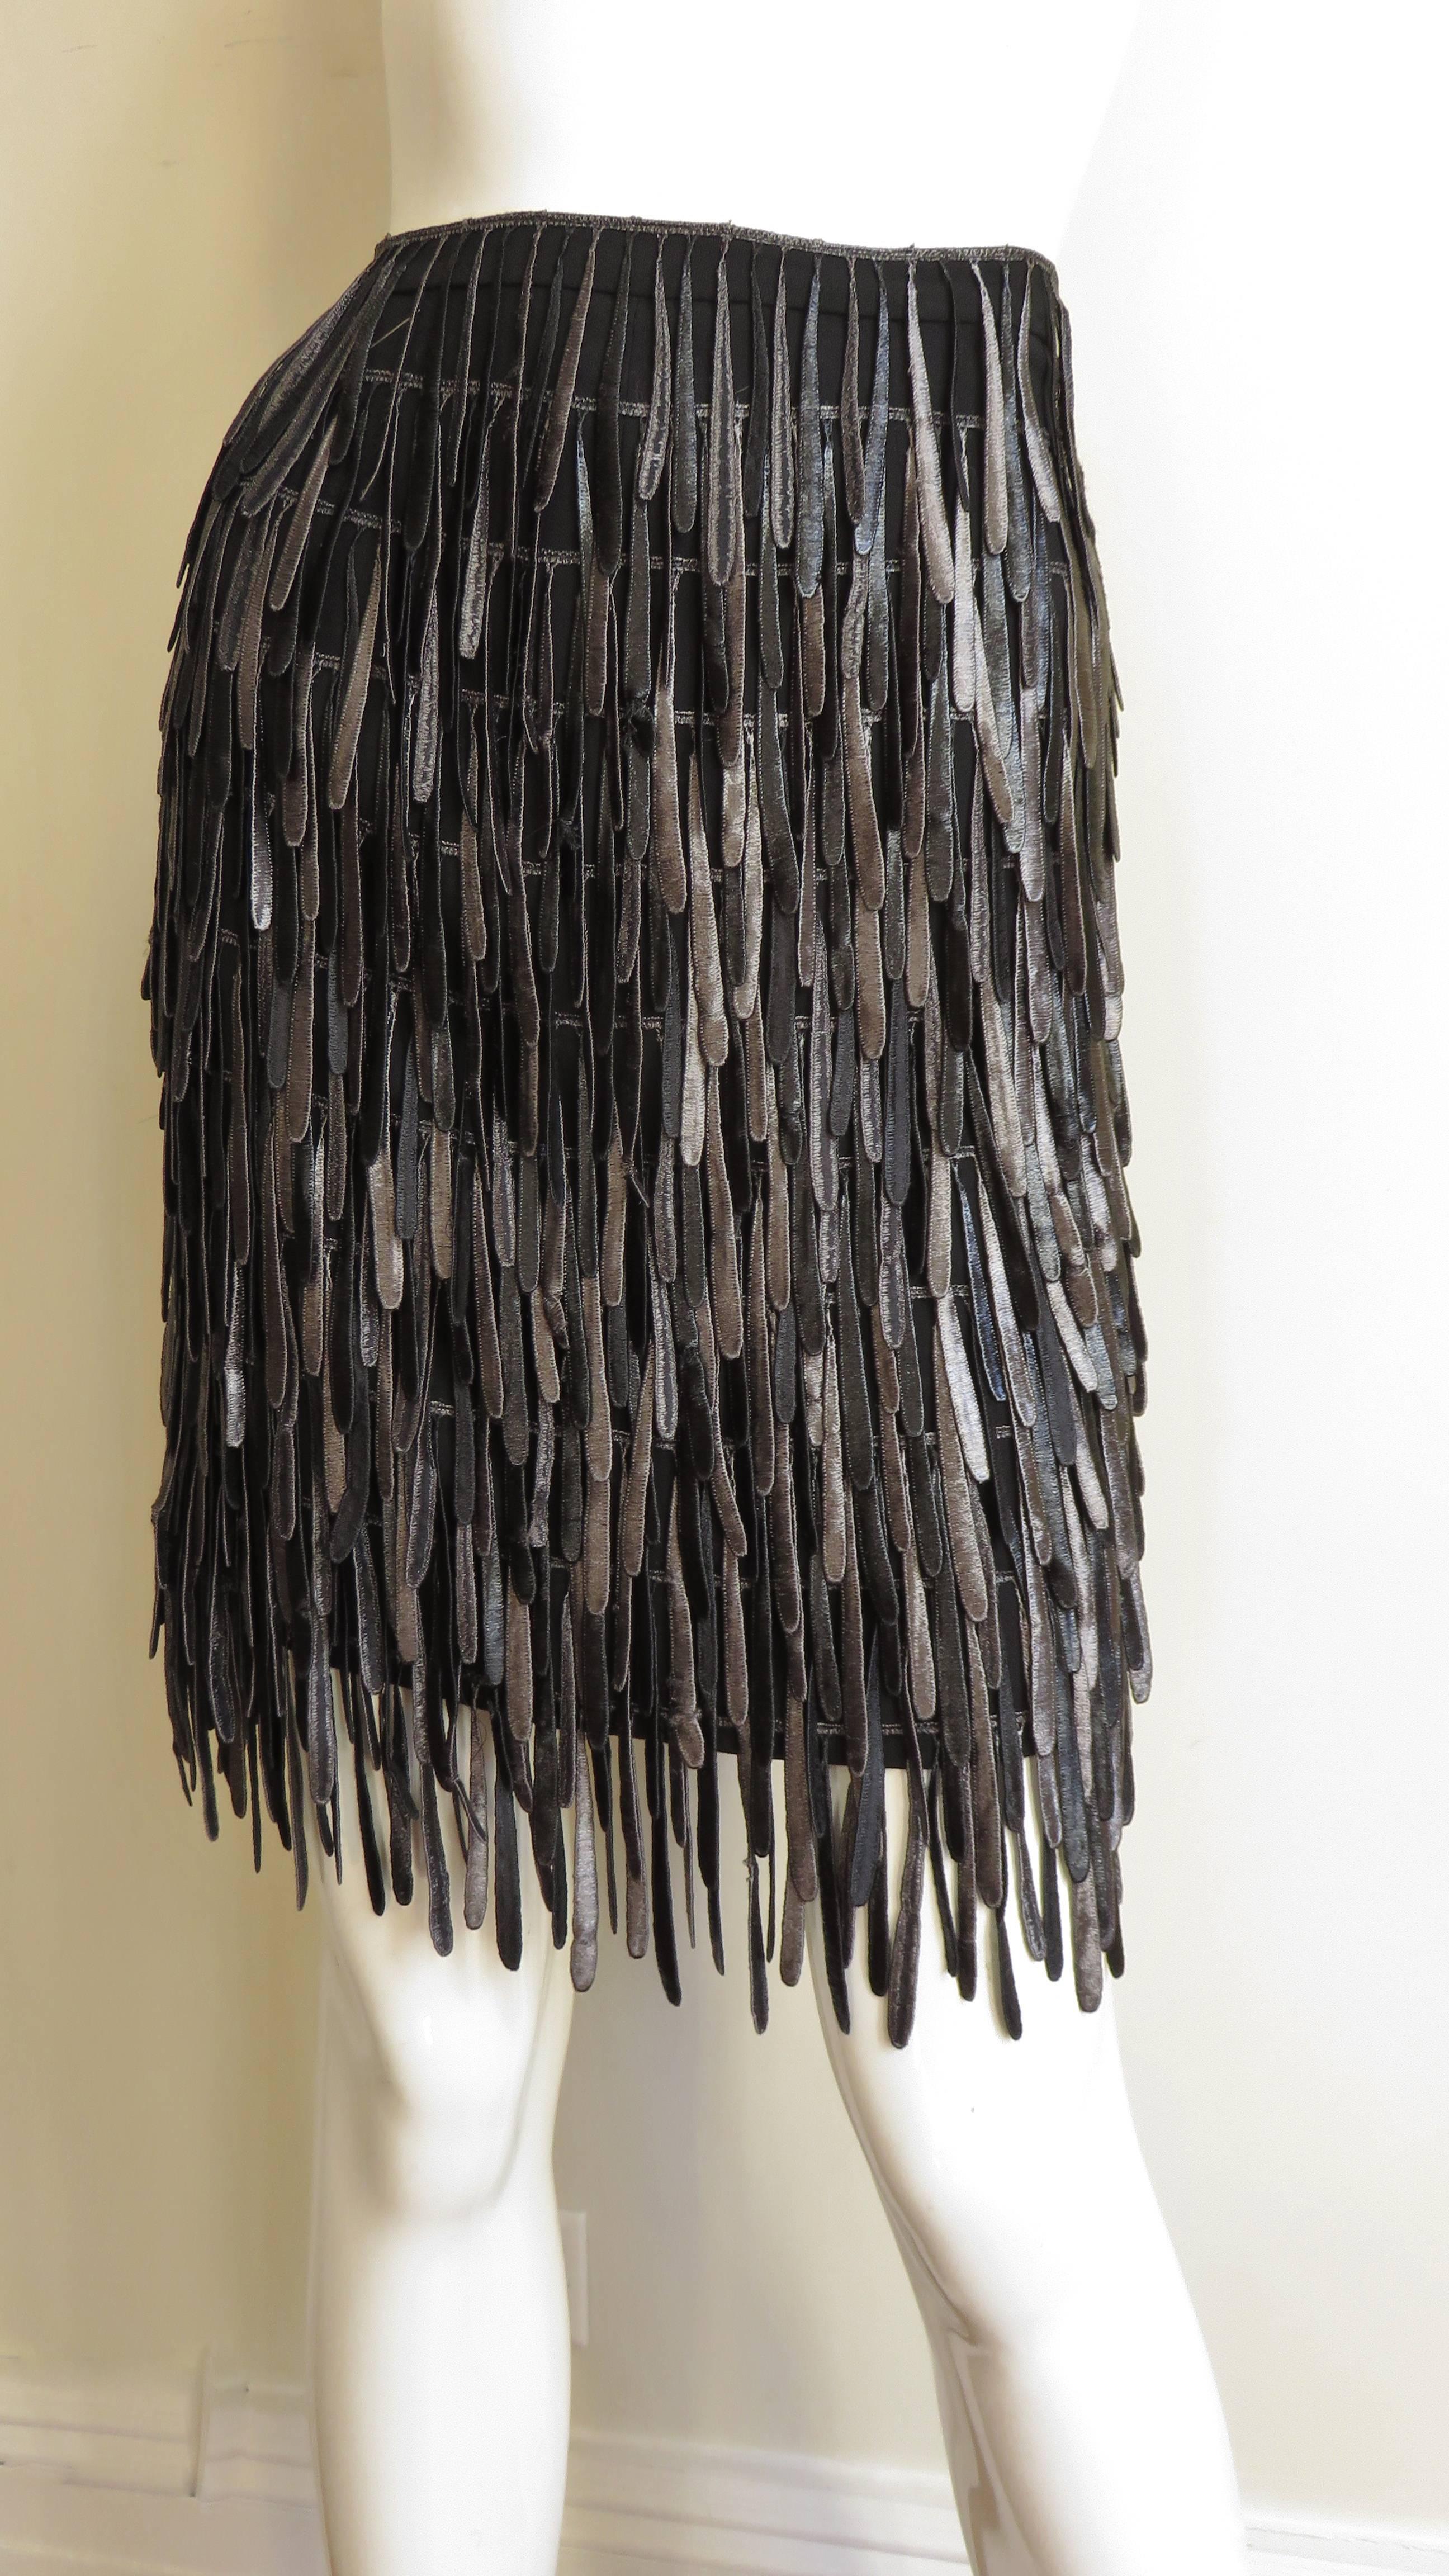 A fabulous silk fringe skirt from Fendi.  It is a straight black skirt covered in rows of 3